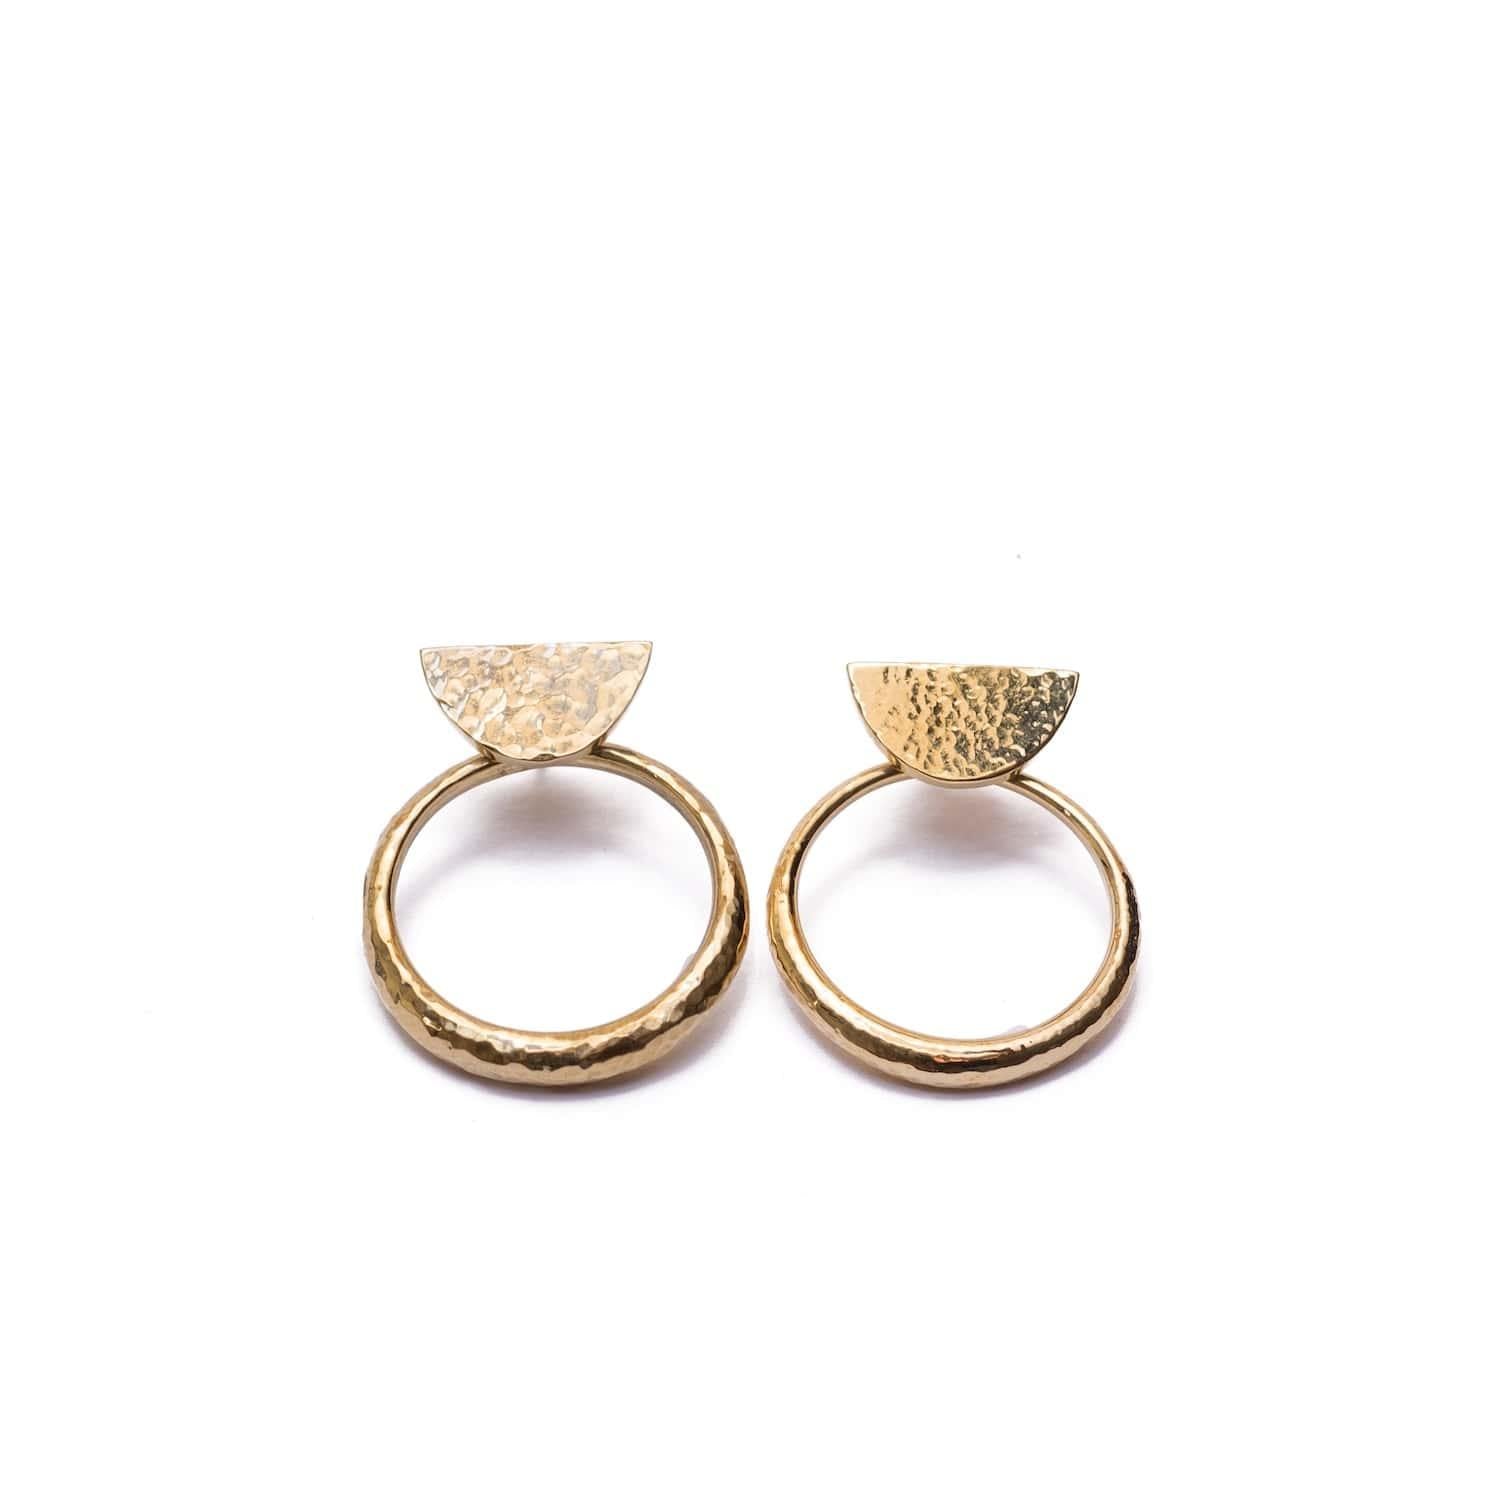 Minimal gold plated hoop earrings with half-moon shaped studs handmade from brass for casual wear